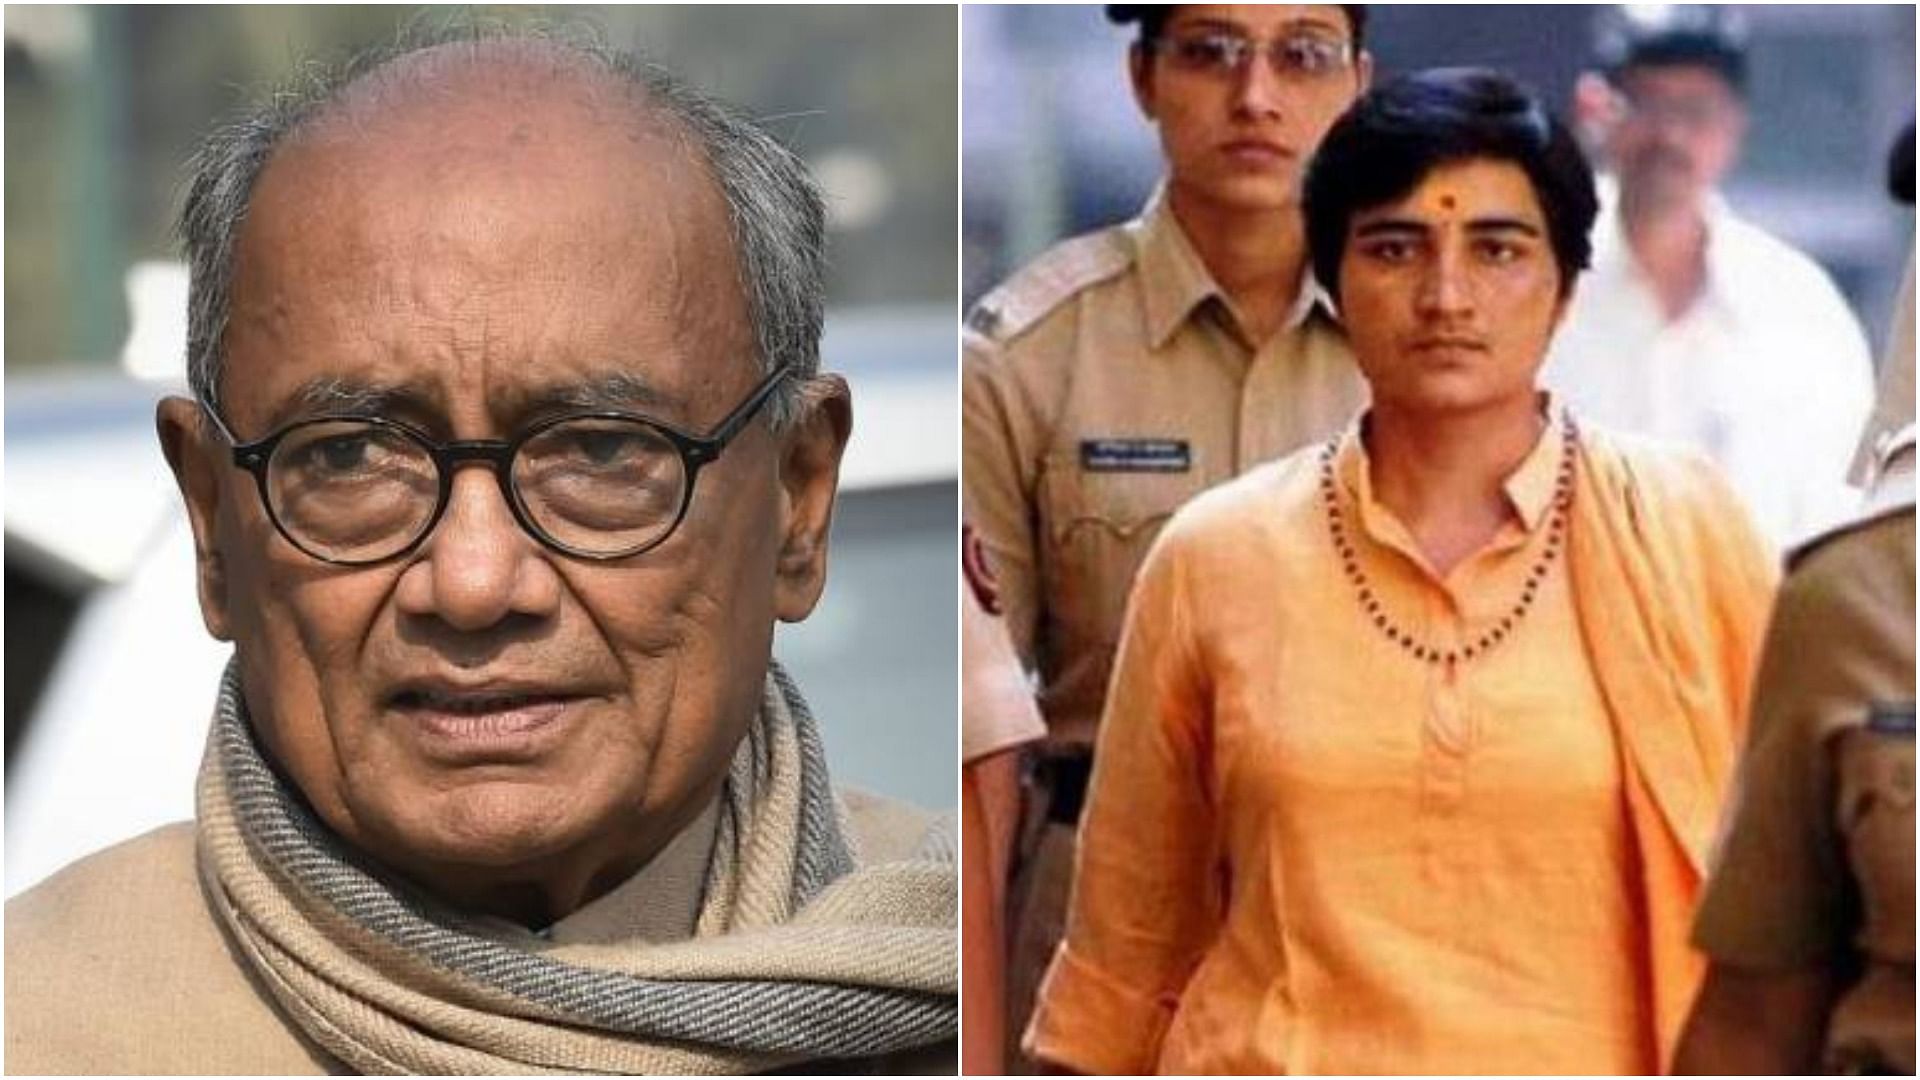 The battle between Digvijay Singh and Pragya Thakur in Bhopal is being touted as one of the most interesting this election.